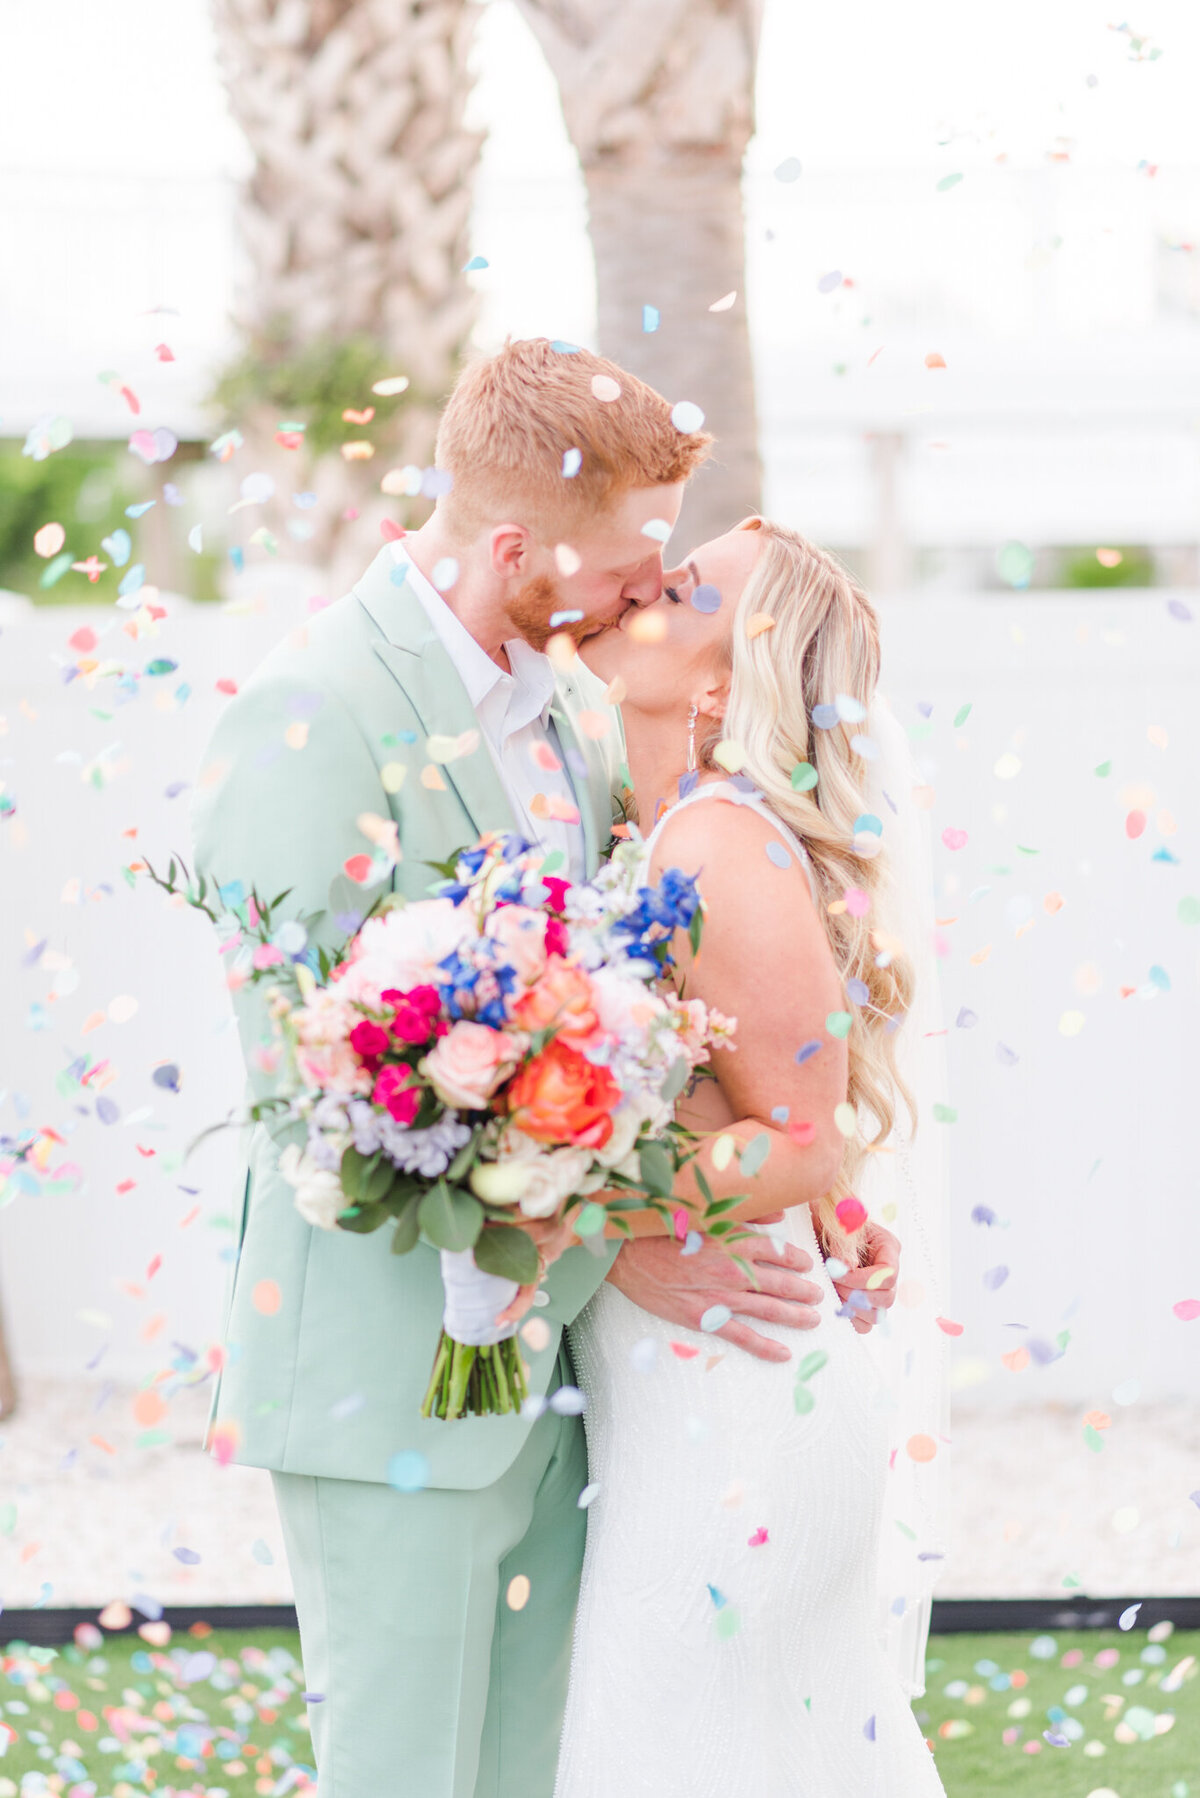 bride and groom kissing with confetti around them on wrigthsville beach, nc